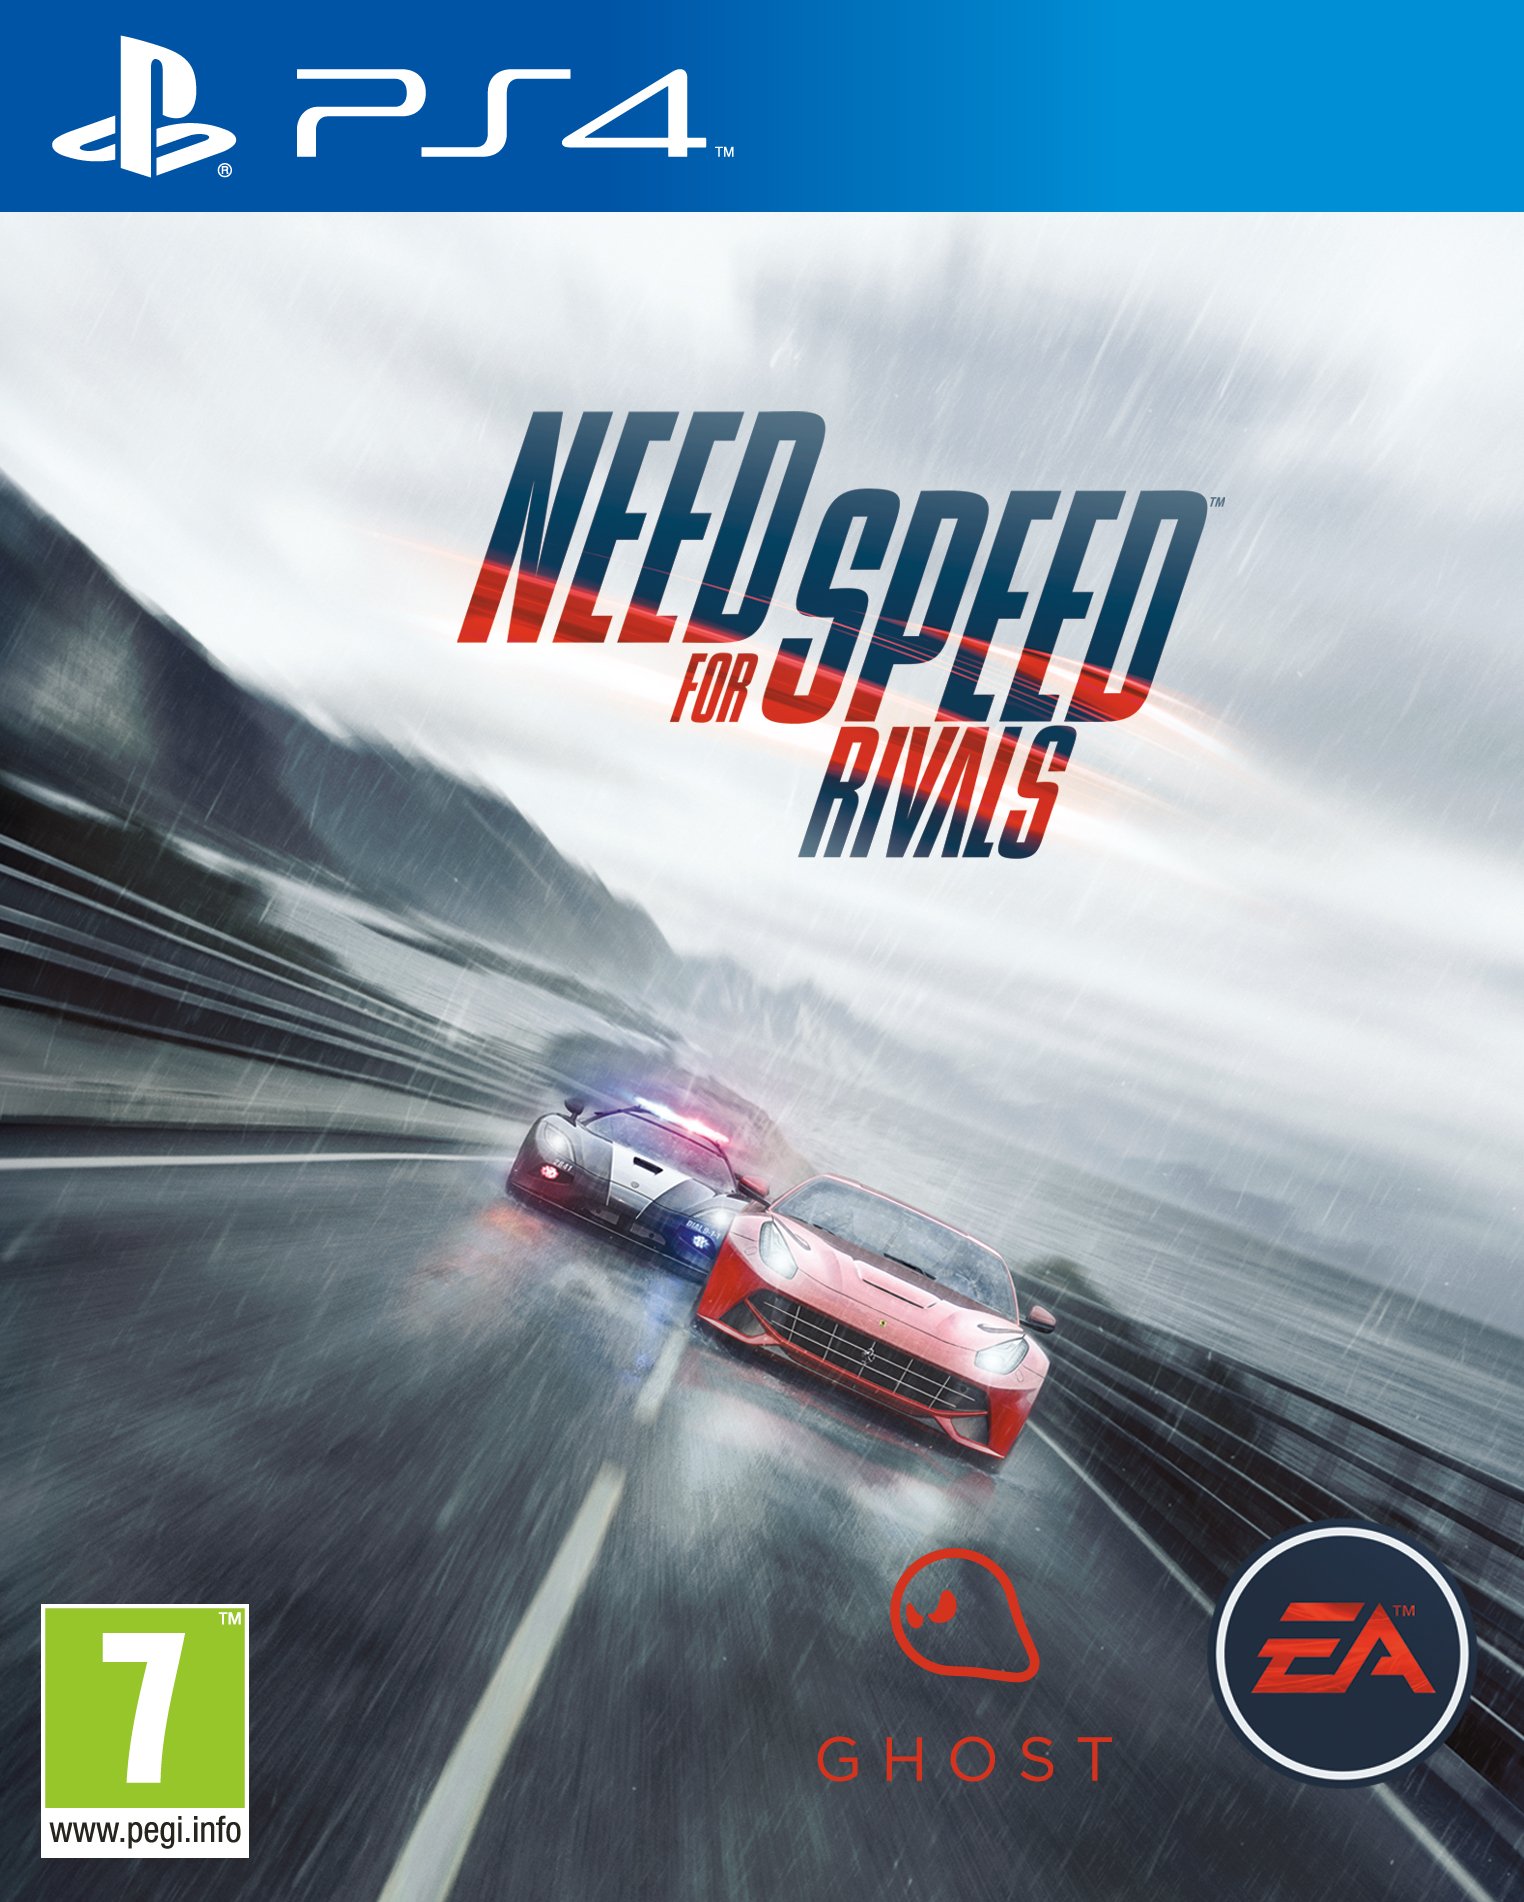 Need for Speed: Rivals [PS4] 5.05 / 6.72 / 7.02 [EUR] (2013) [Английский] (v1.03)